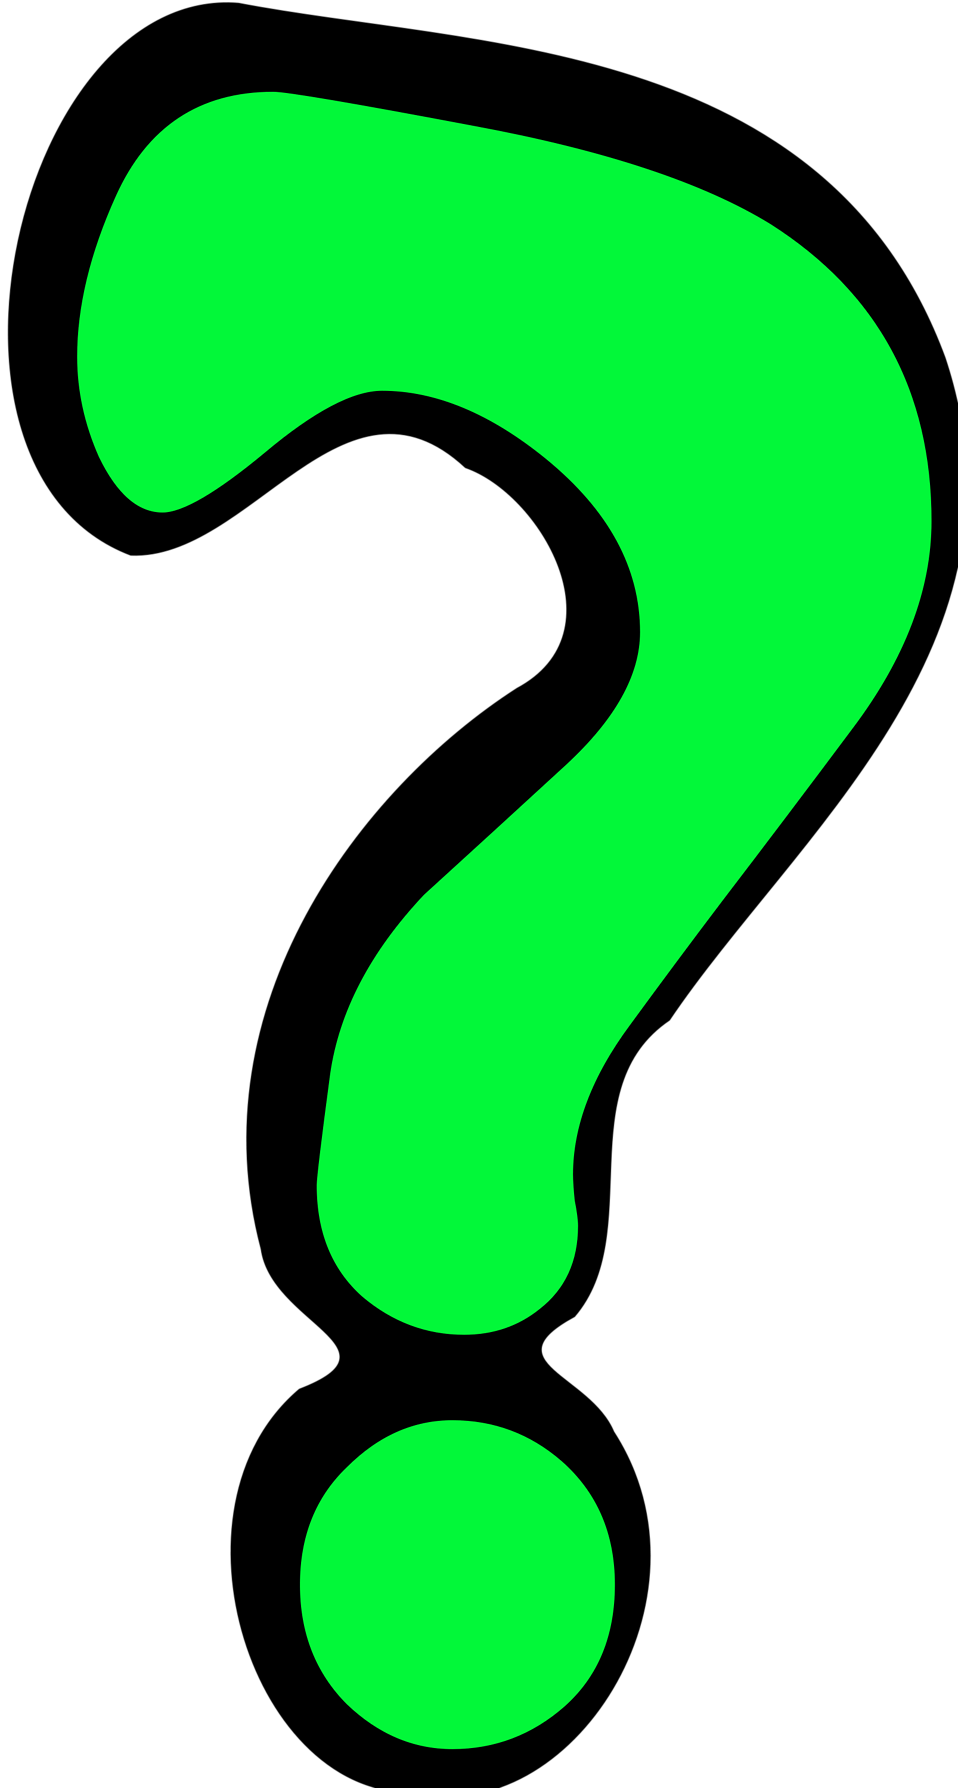 Question Mark | Free Stock Photo | Illustration of a green ...